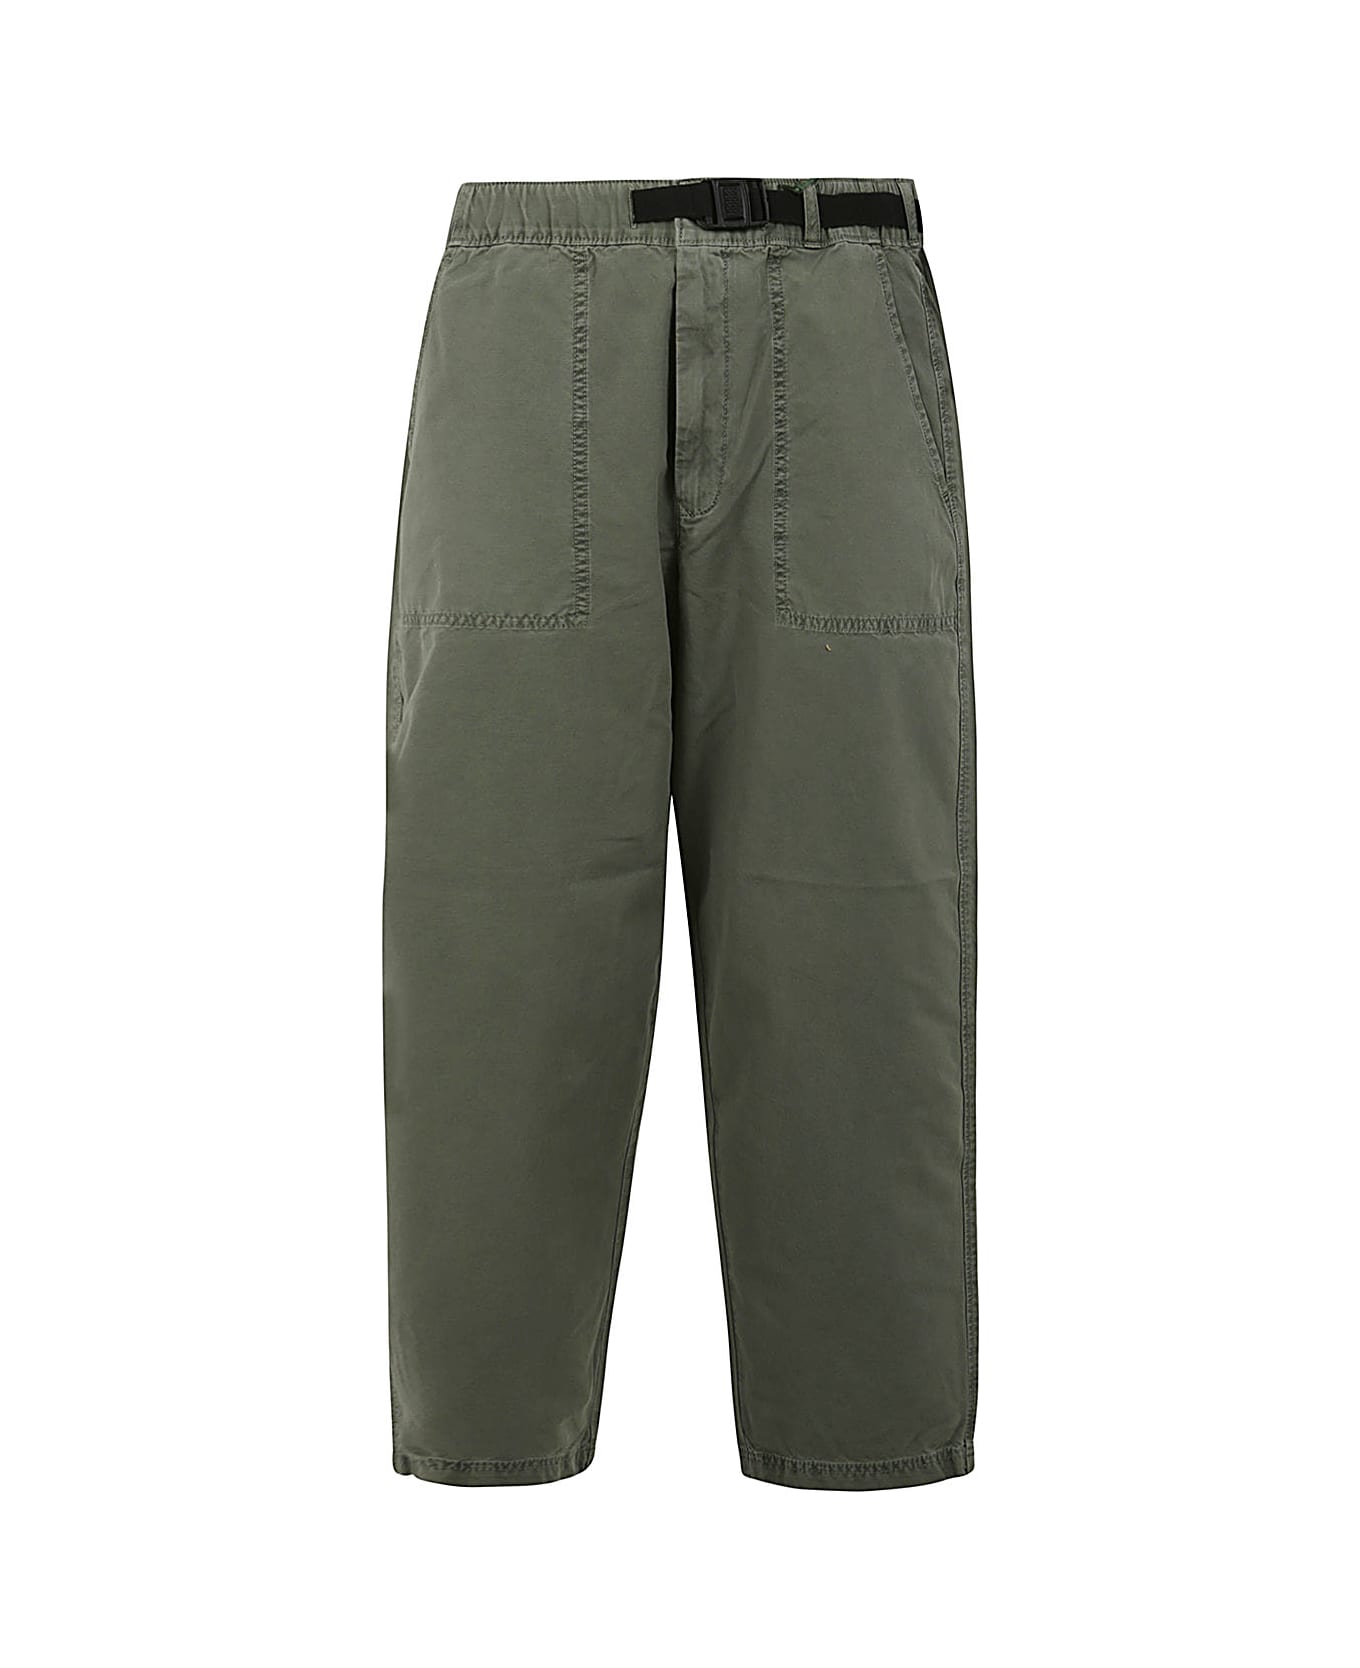 Barbour Grindle Trousers - Agave Green